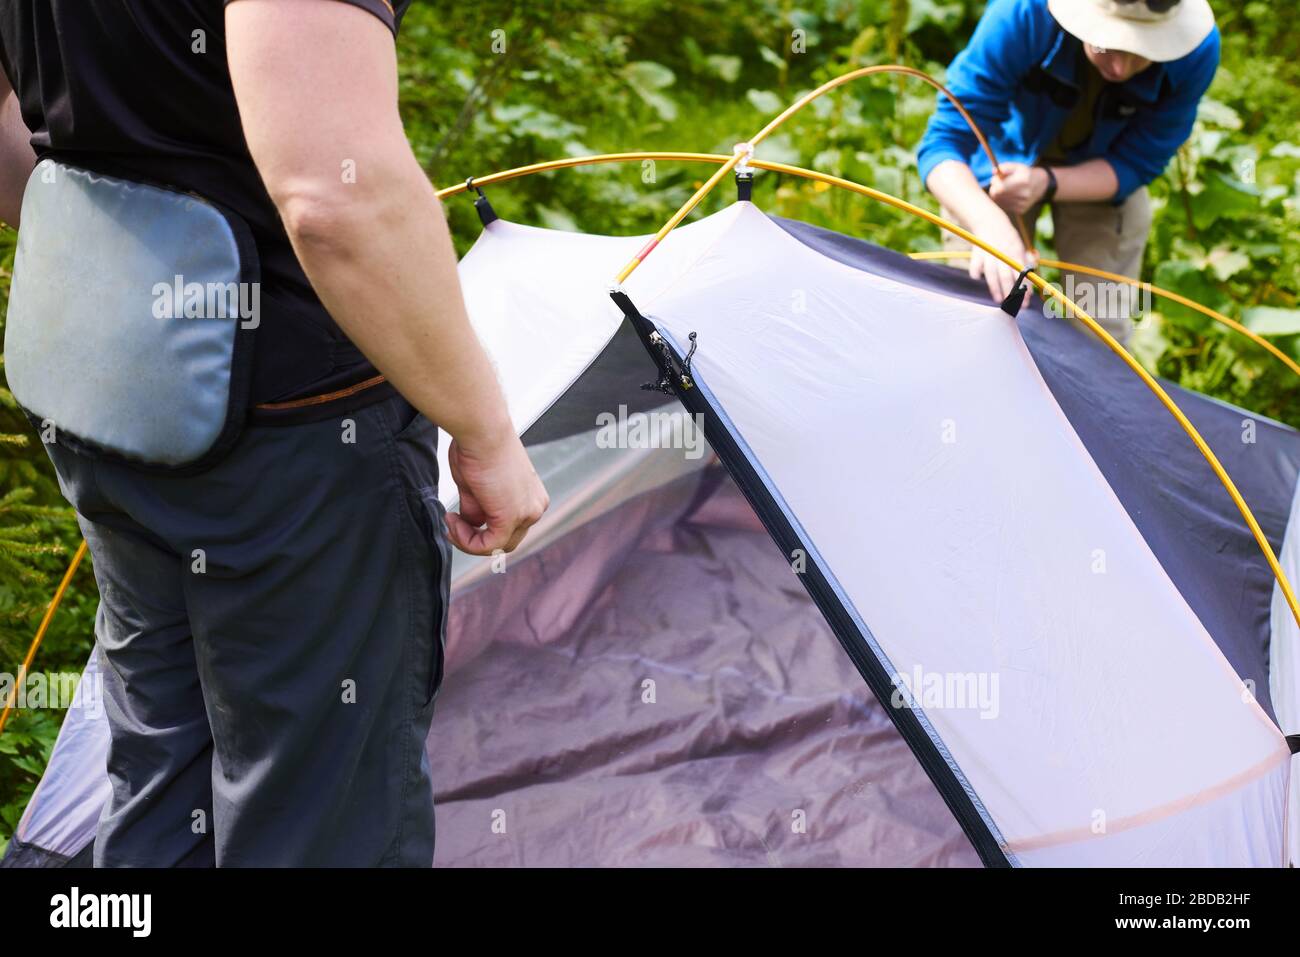 How to Set Up a Tent: Step-by-Step